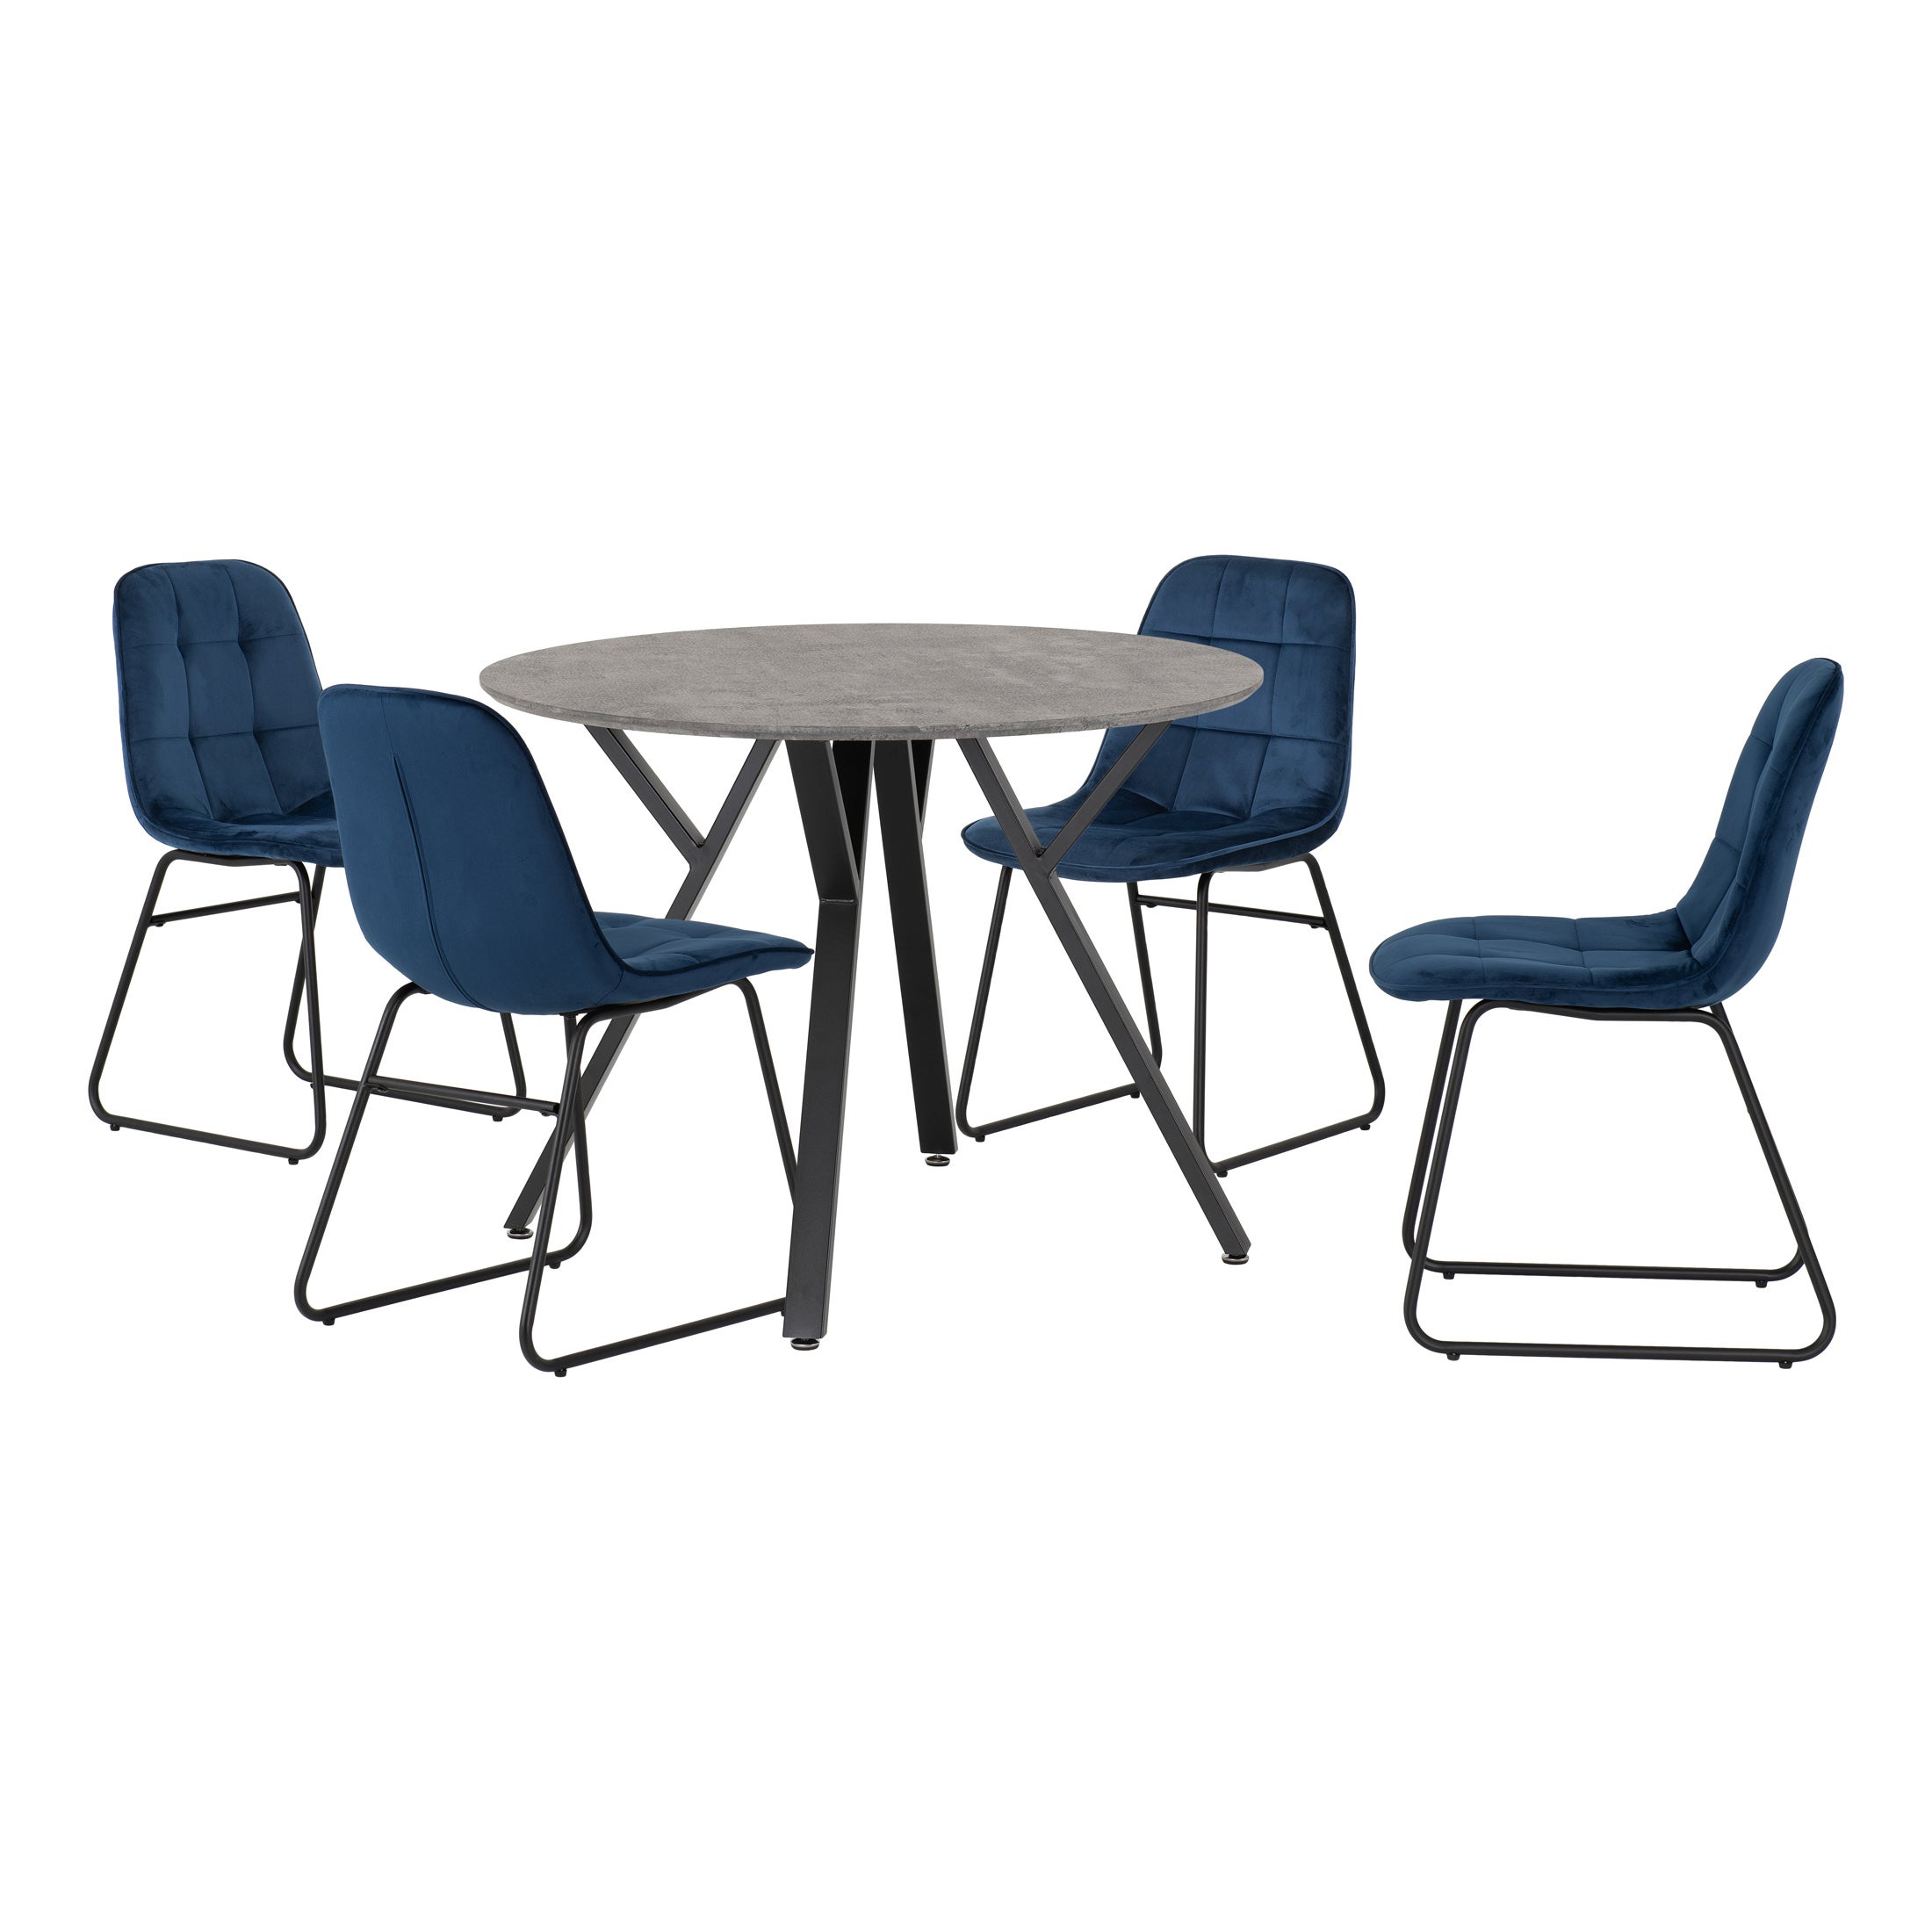 Athens Round Dining Table with 4 Lukas Chairs Navy Blue